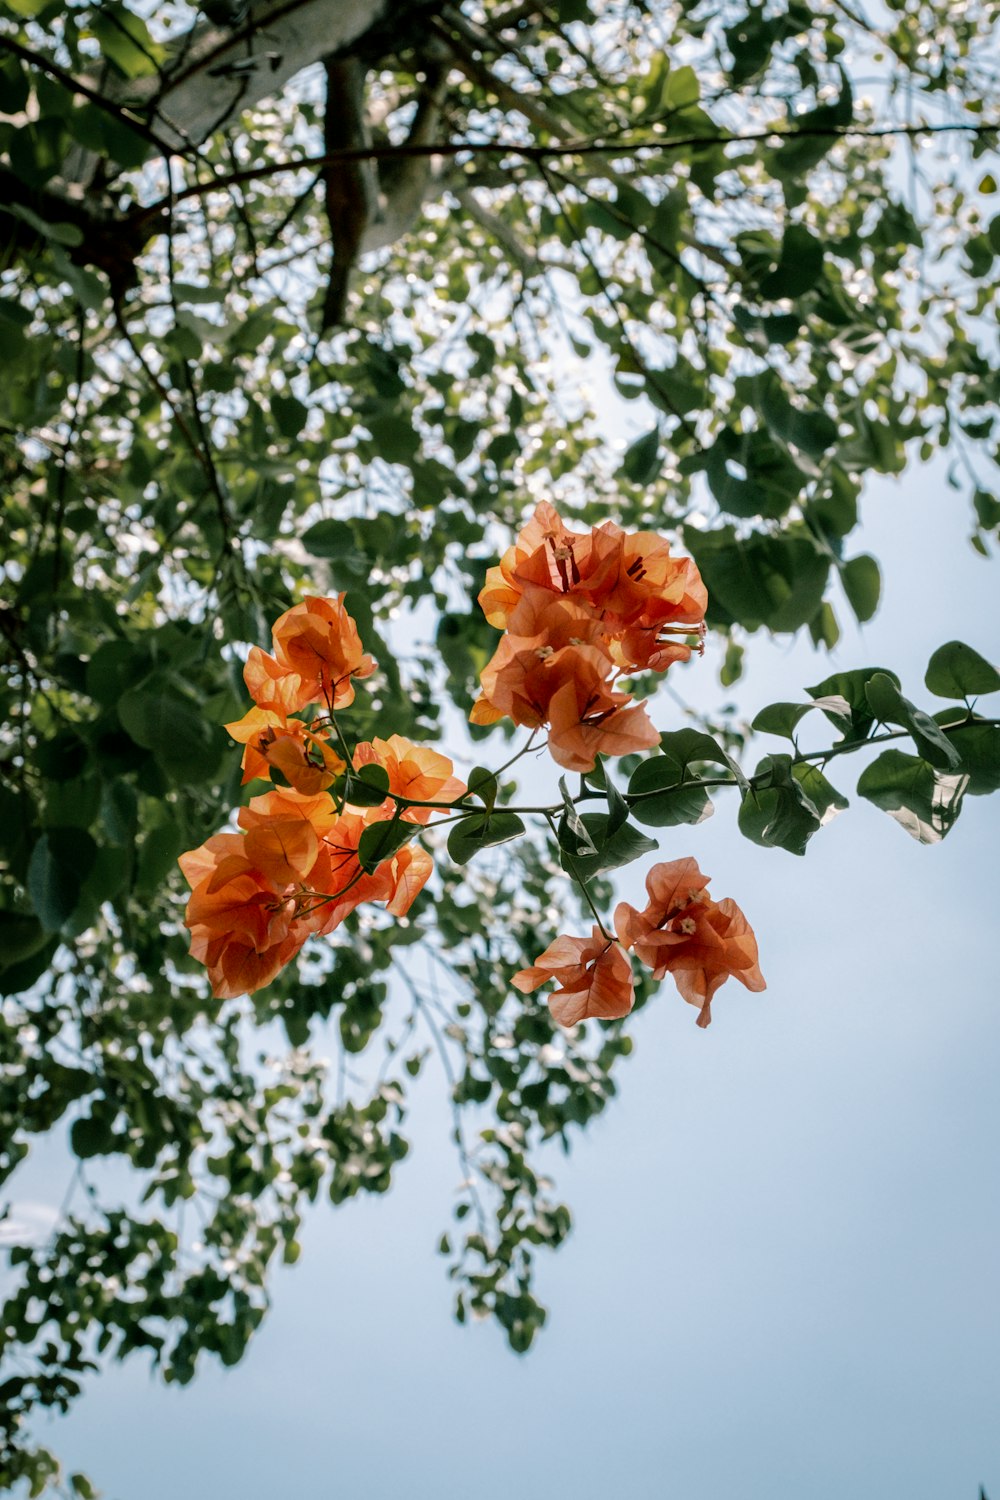 orange flowers are blooming on a tree branch